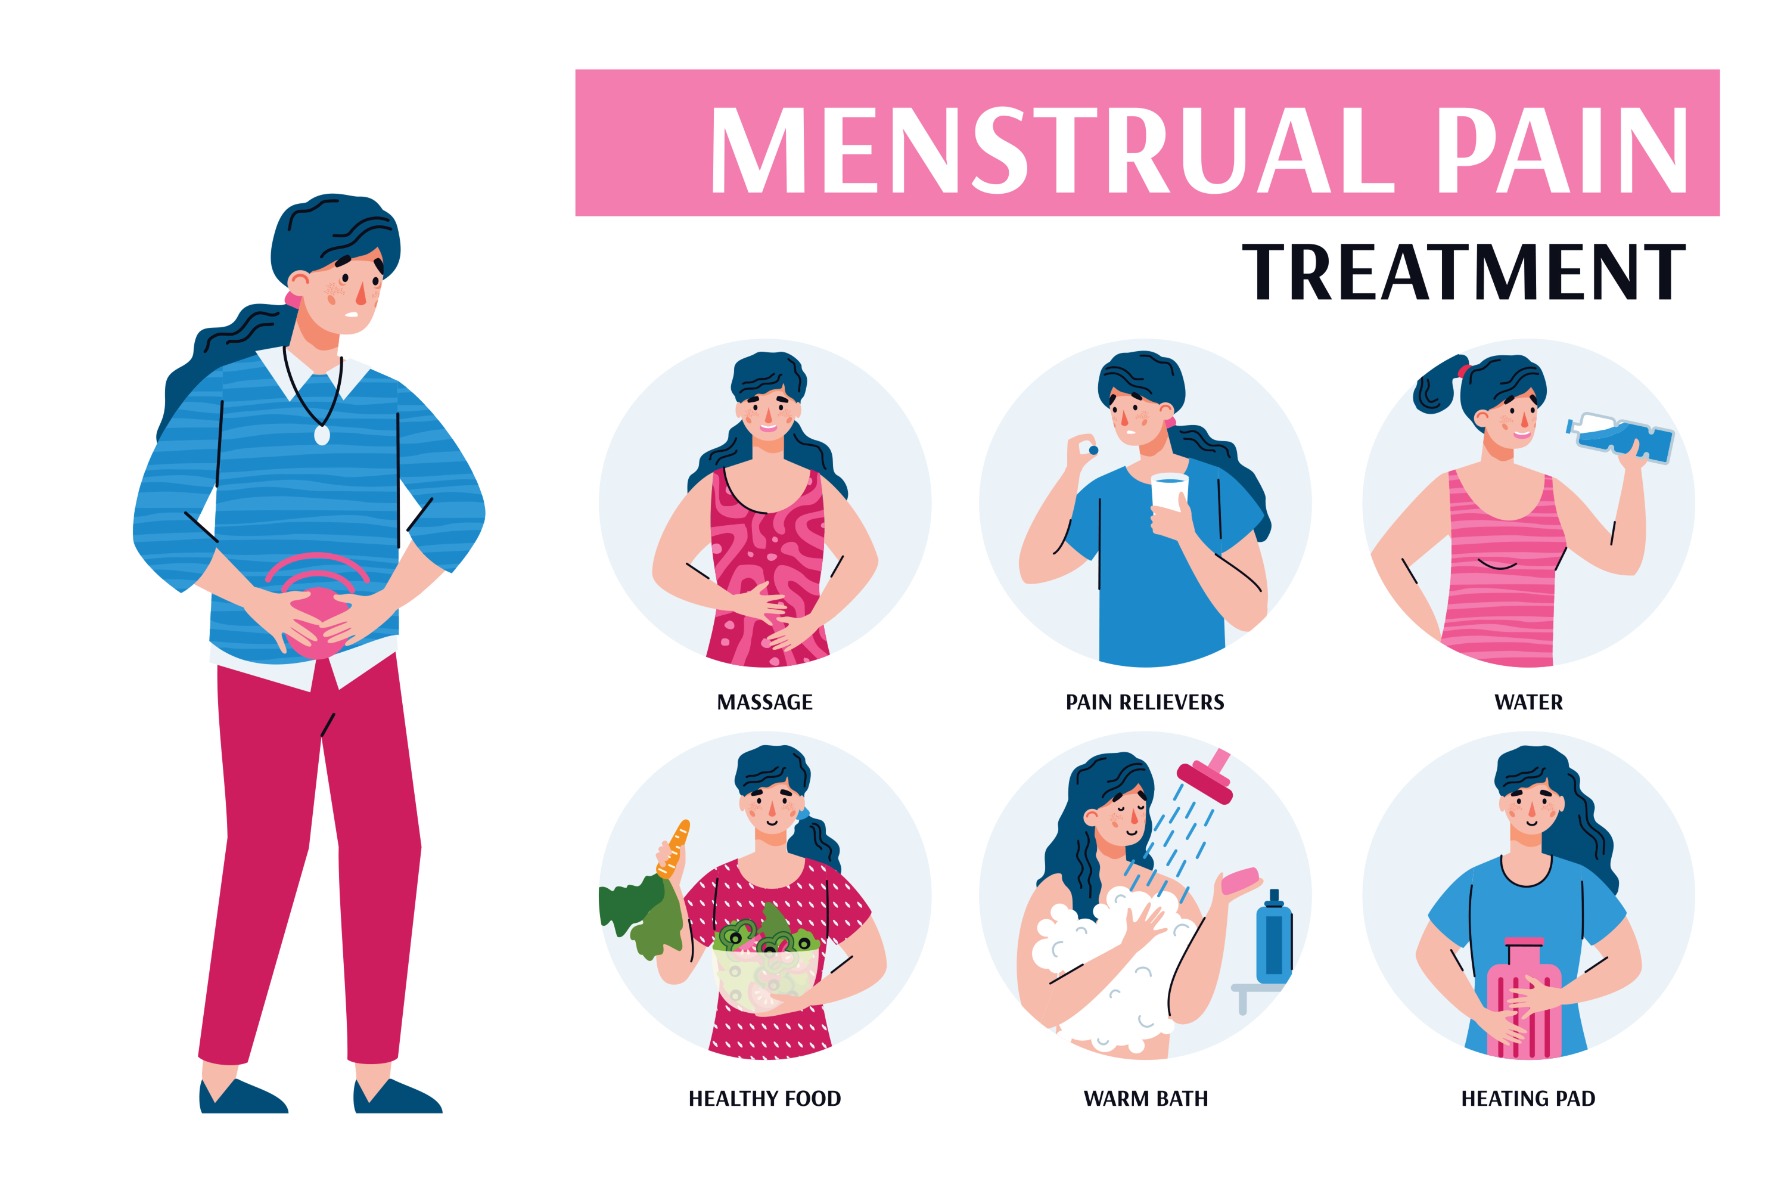 10 Home Remedies for Menstrual or Period Cramp Relief